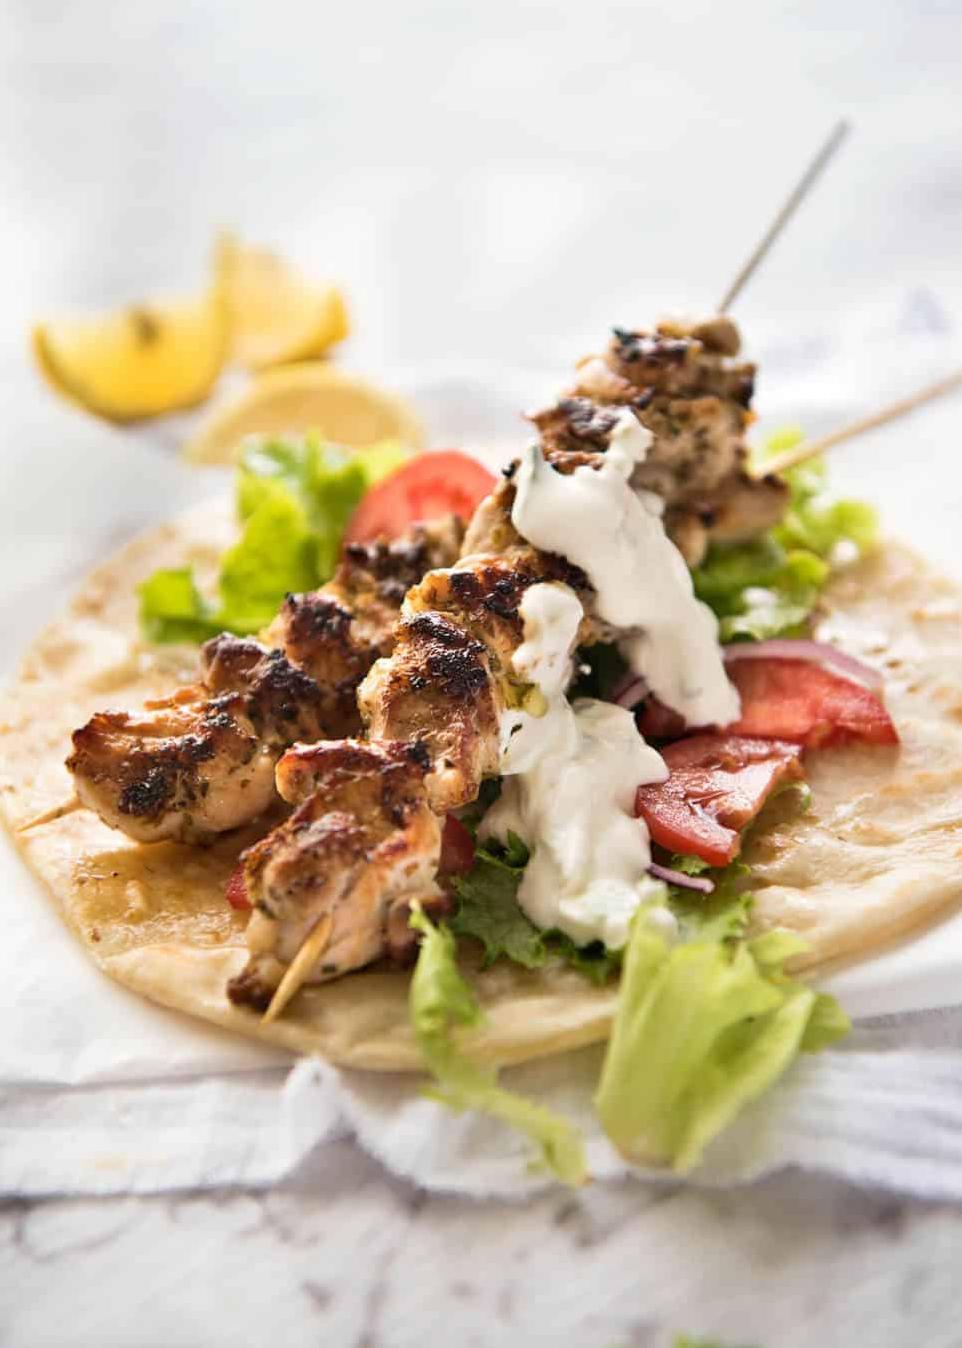  The combination of tender chicken and tangy tzatziki sauce will leave your taste buds wanting more